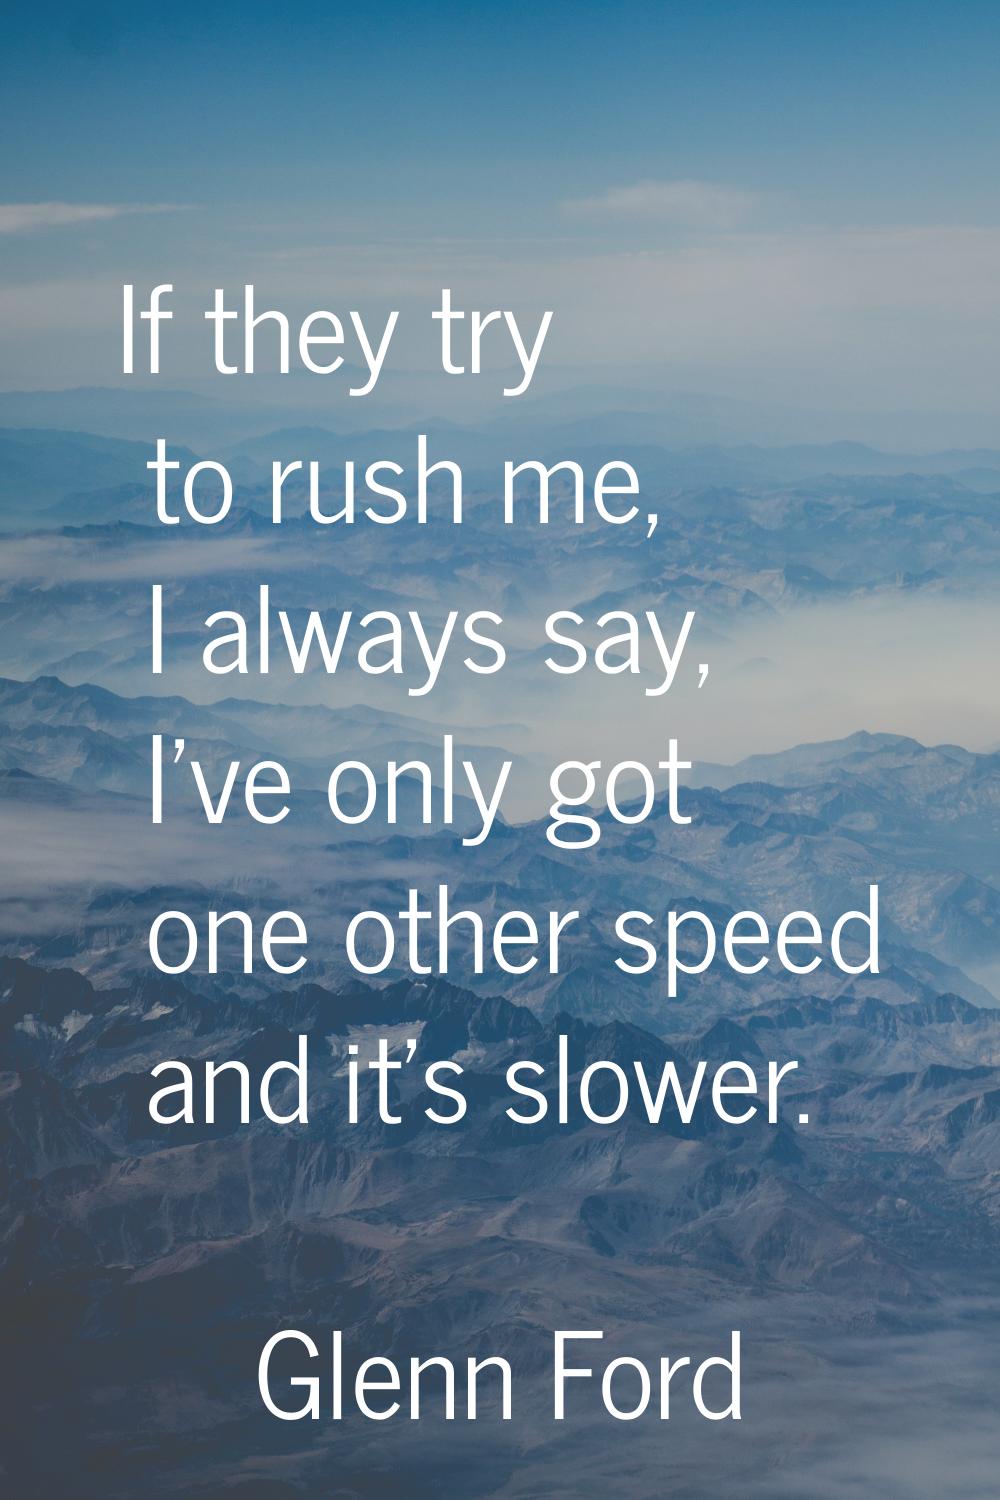 If they try to rush me, I always say, I've only got one other speed and it's slower.